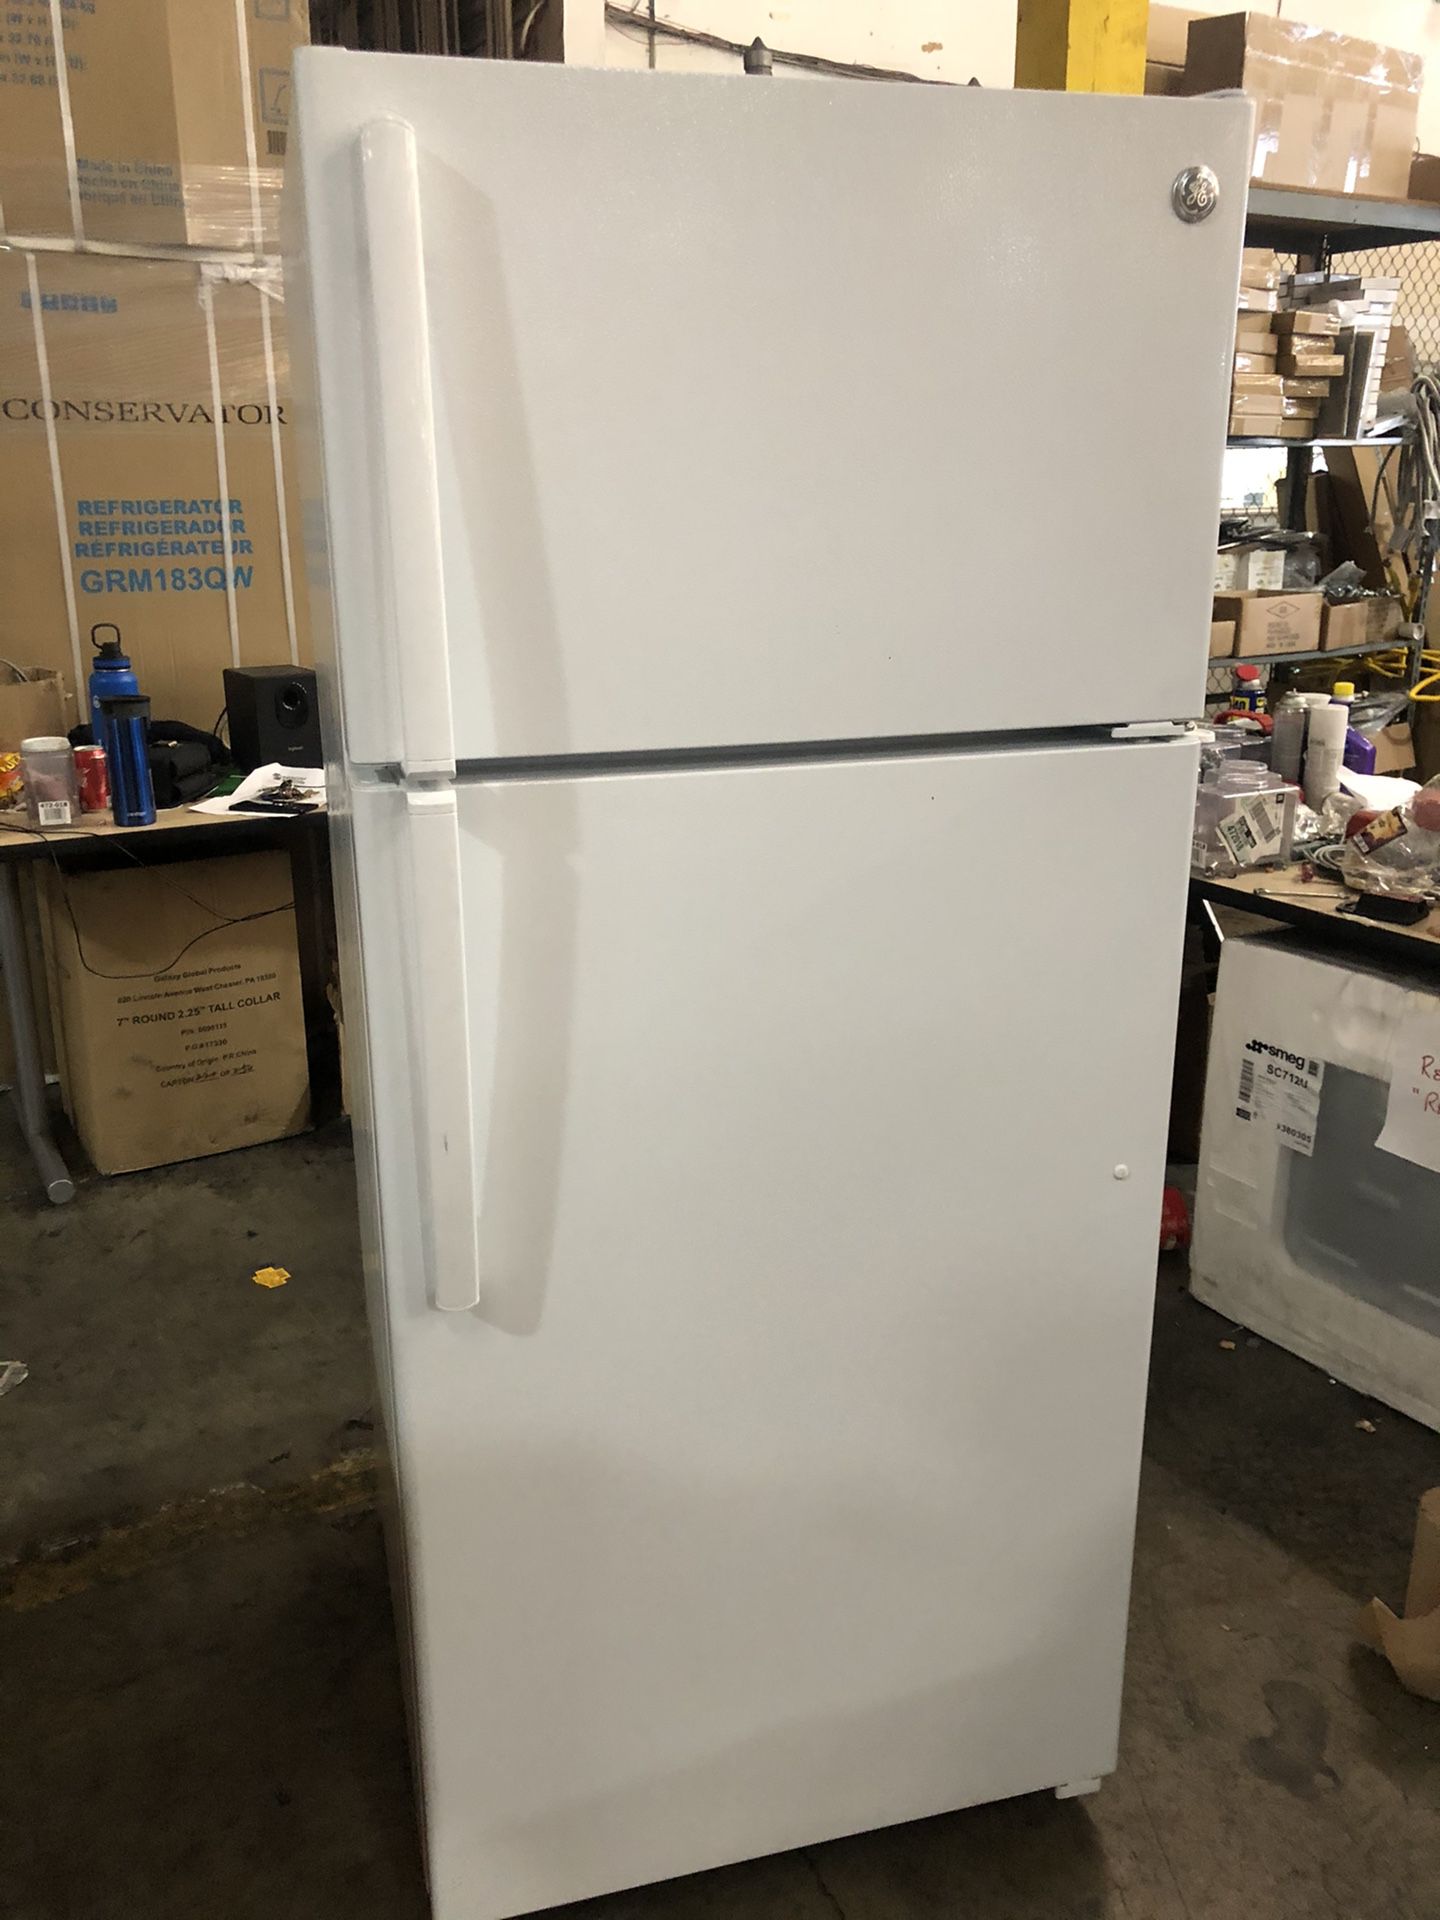 Slightly Used but Includes 1 Year Warranty GE 16 Cu Ft Top Freezer Refrigerator w/Wire Shelves White ***Save 100’s!*** Sells for $587+!